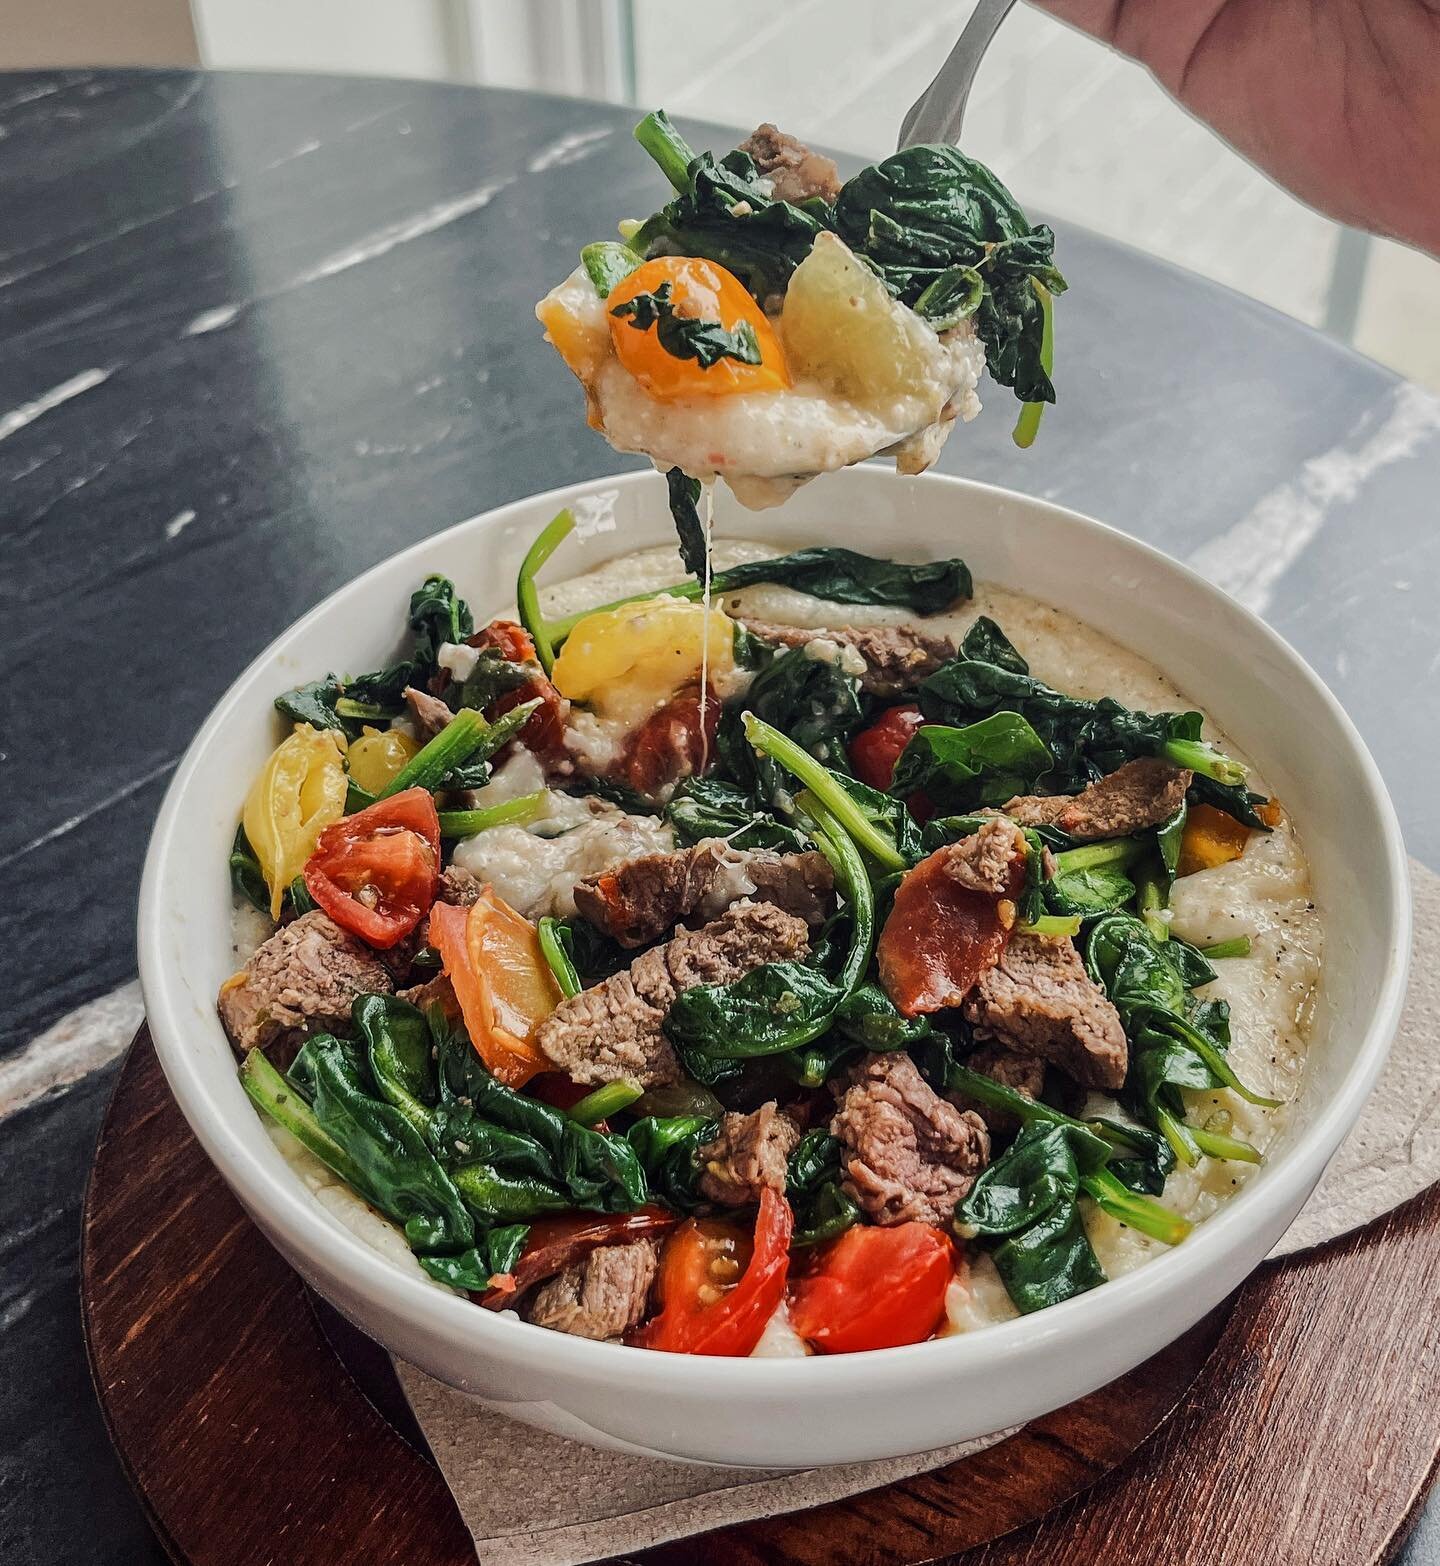 Fan-Fave homestyle grits, sirloin steak bites, wilted spinach, pepper hack and cherry tomato! 💃🏼